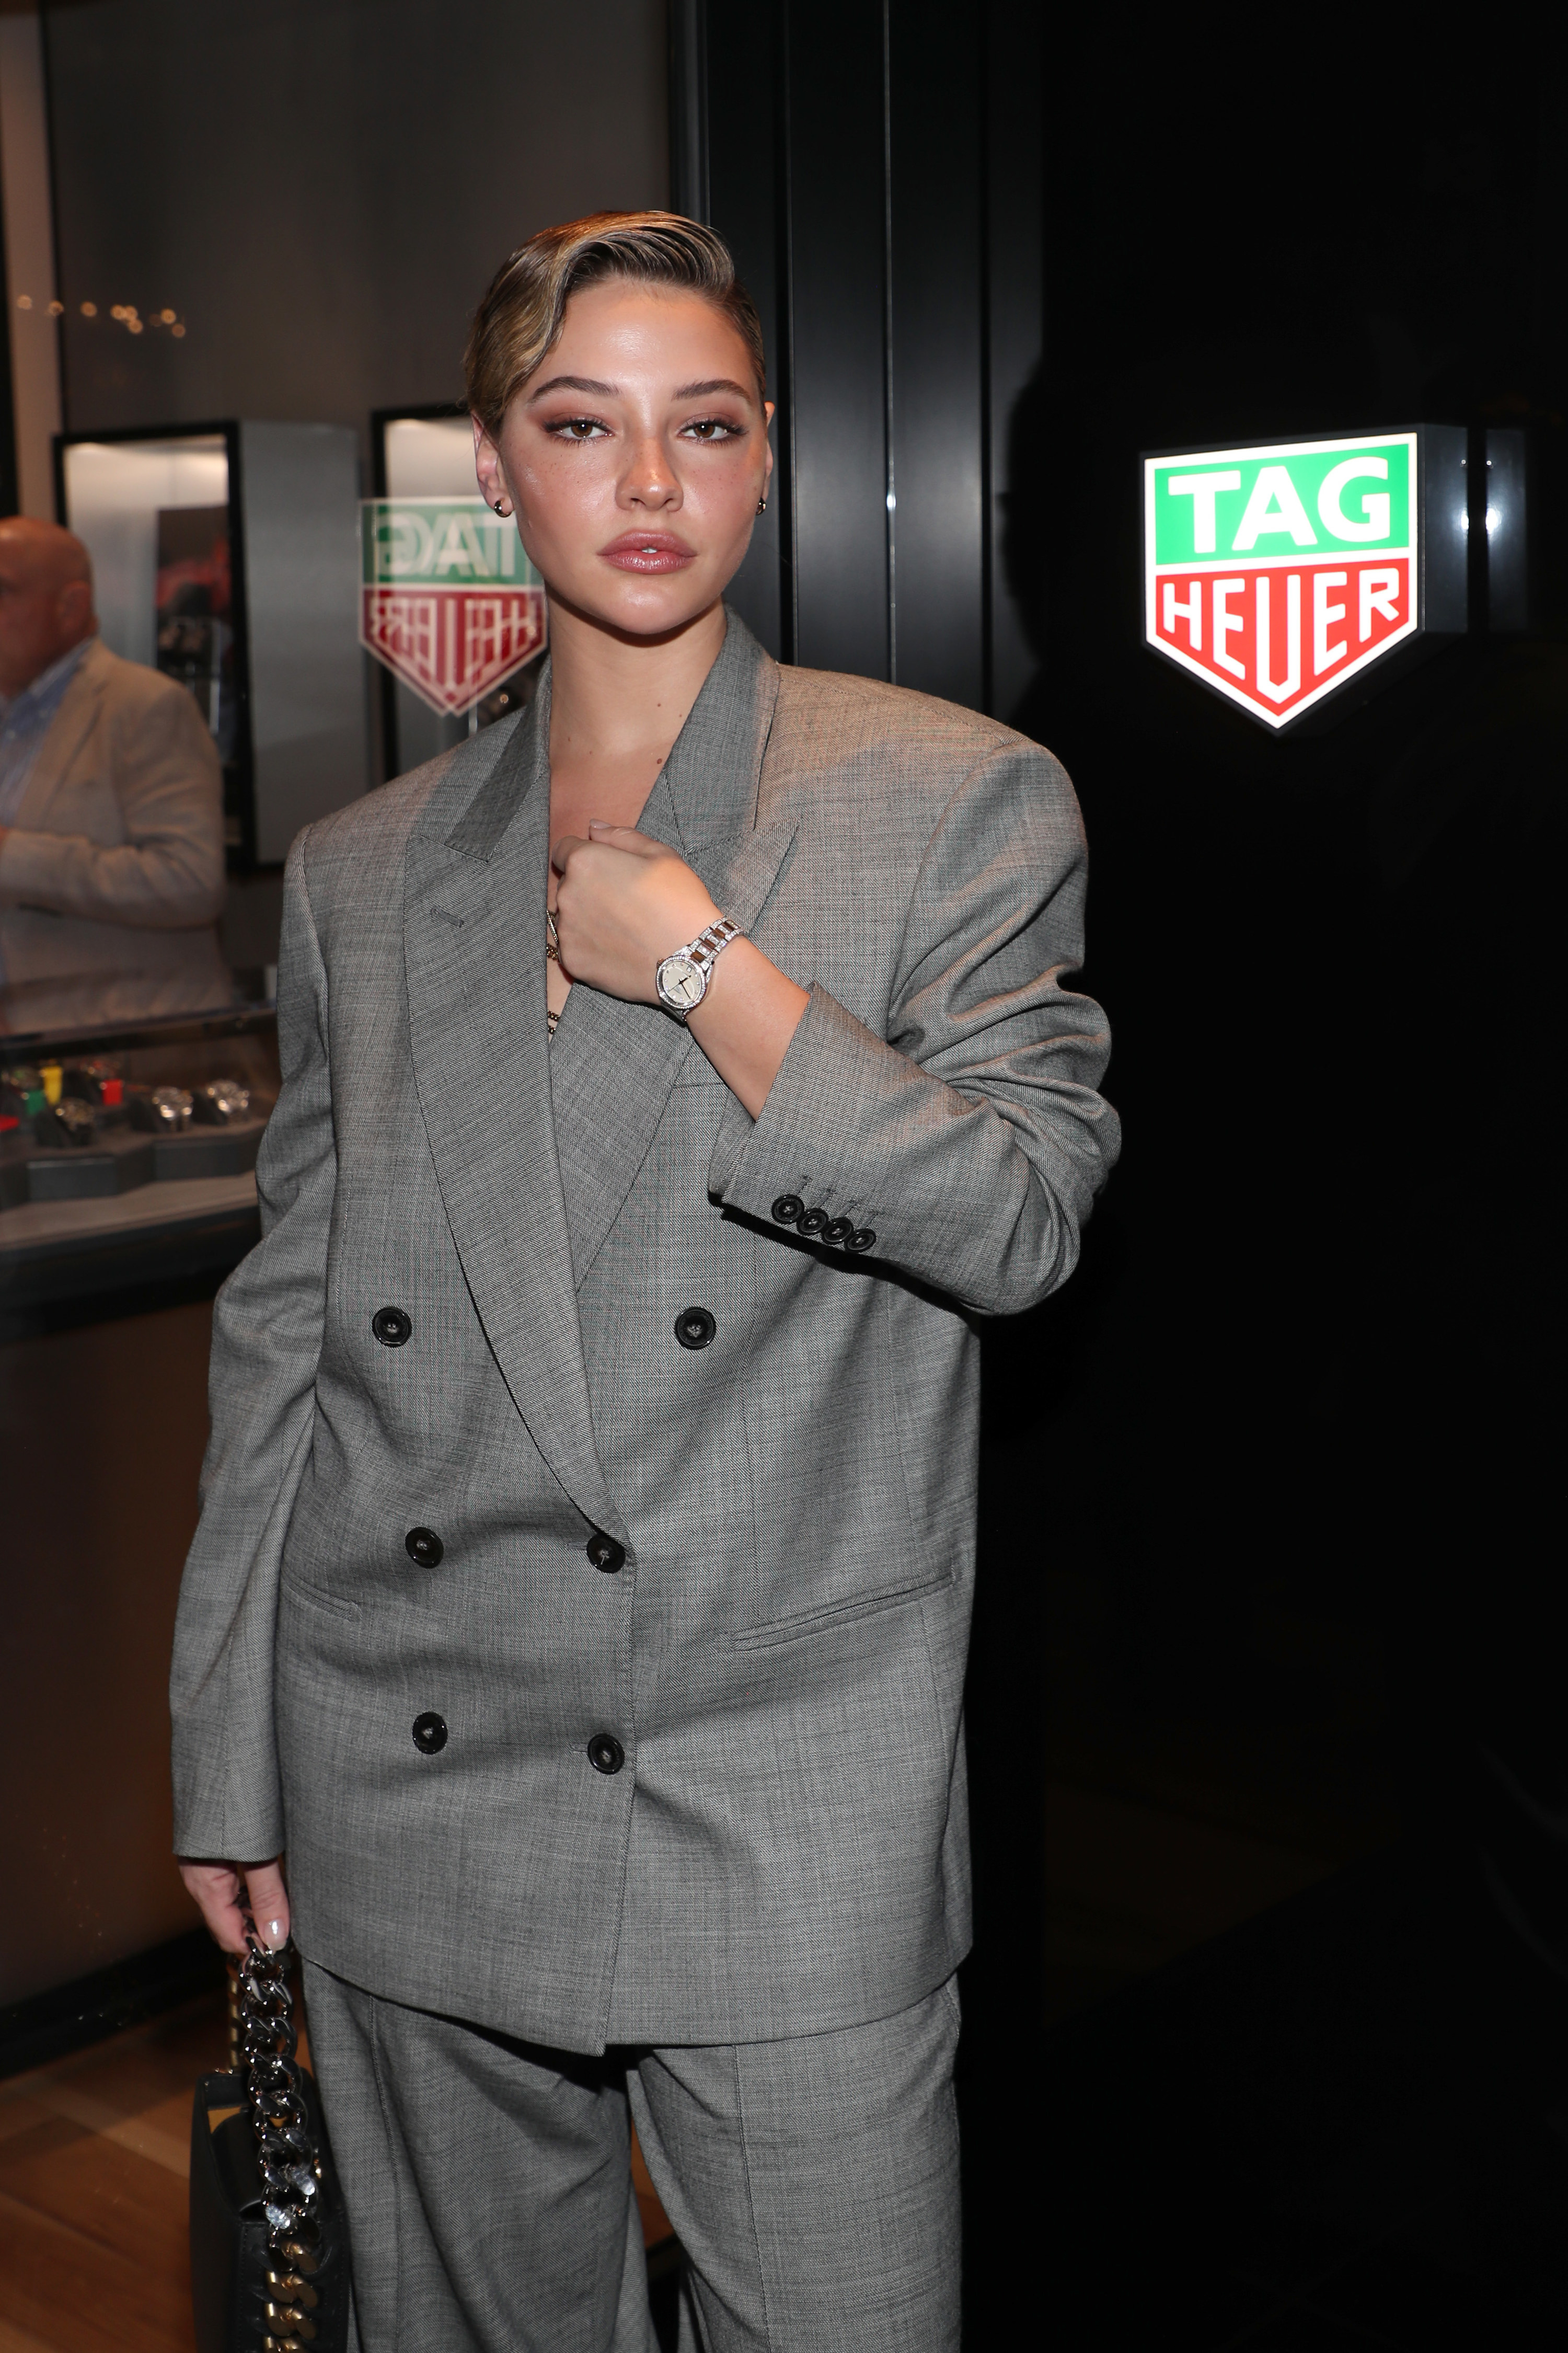 Madelyn wears a loose-fitting suit as she poses for a photo at an event